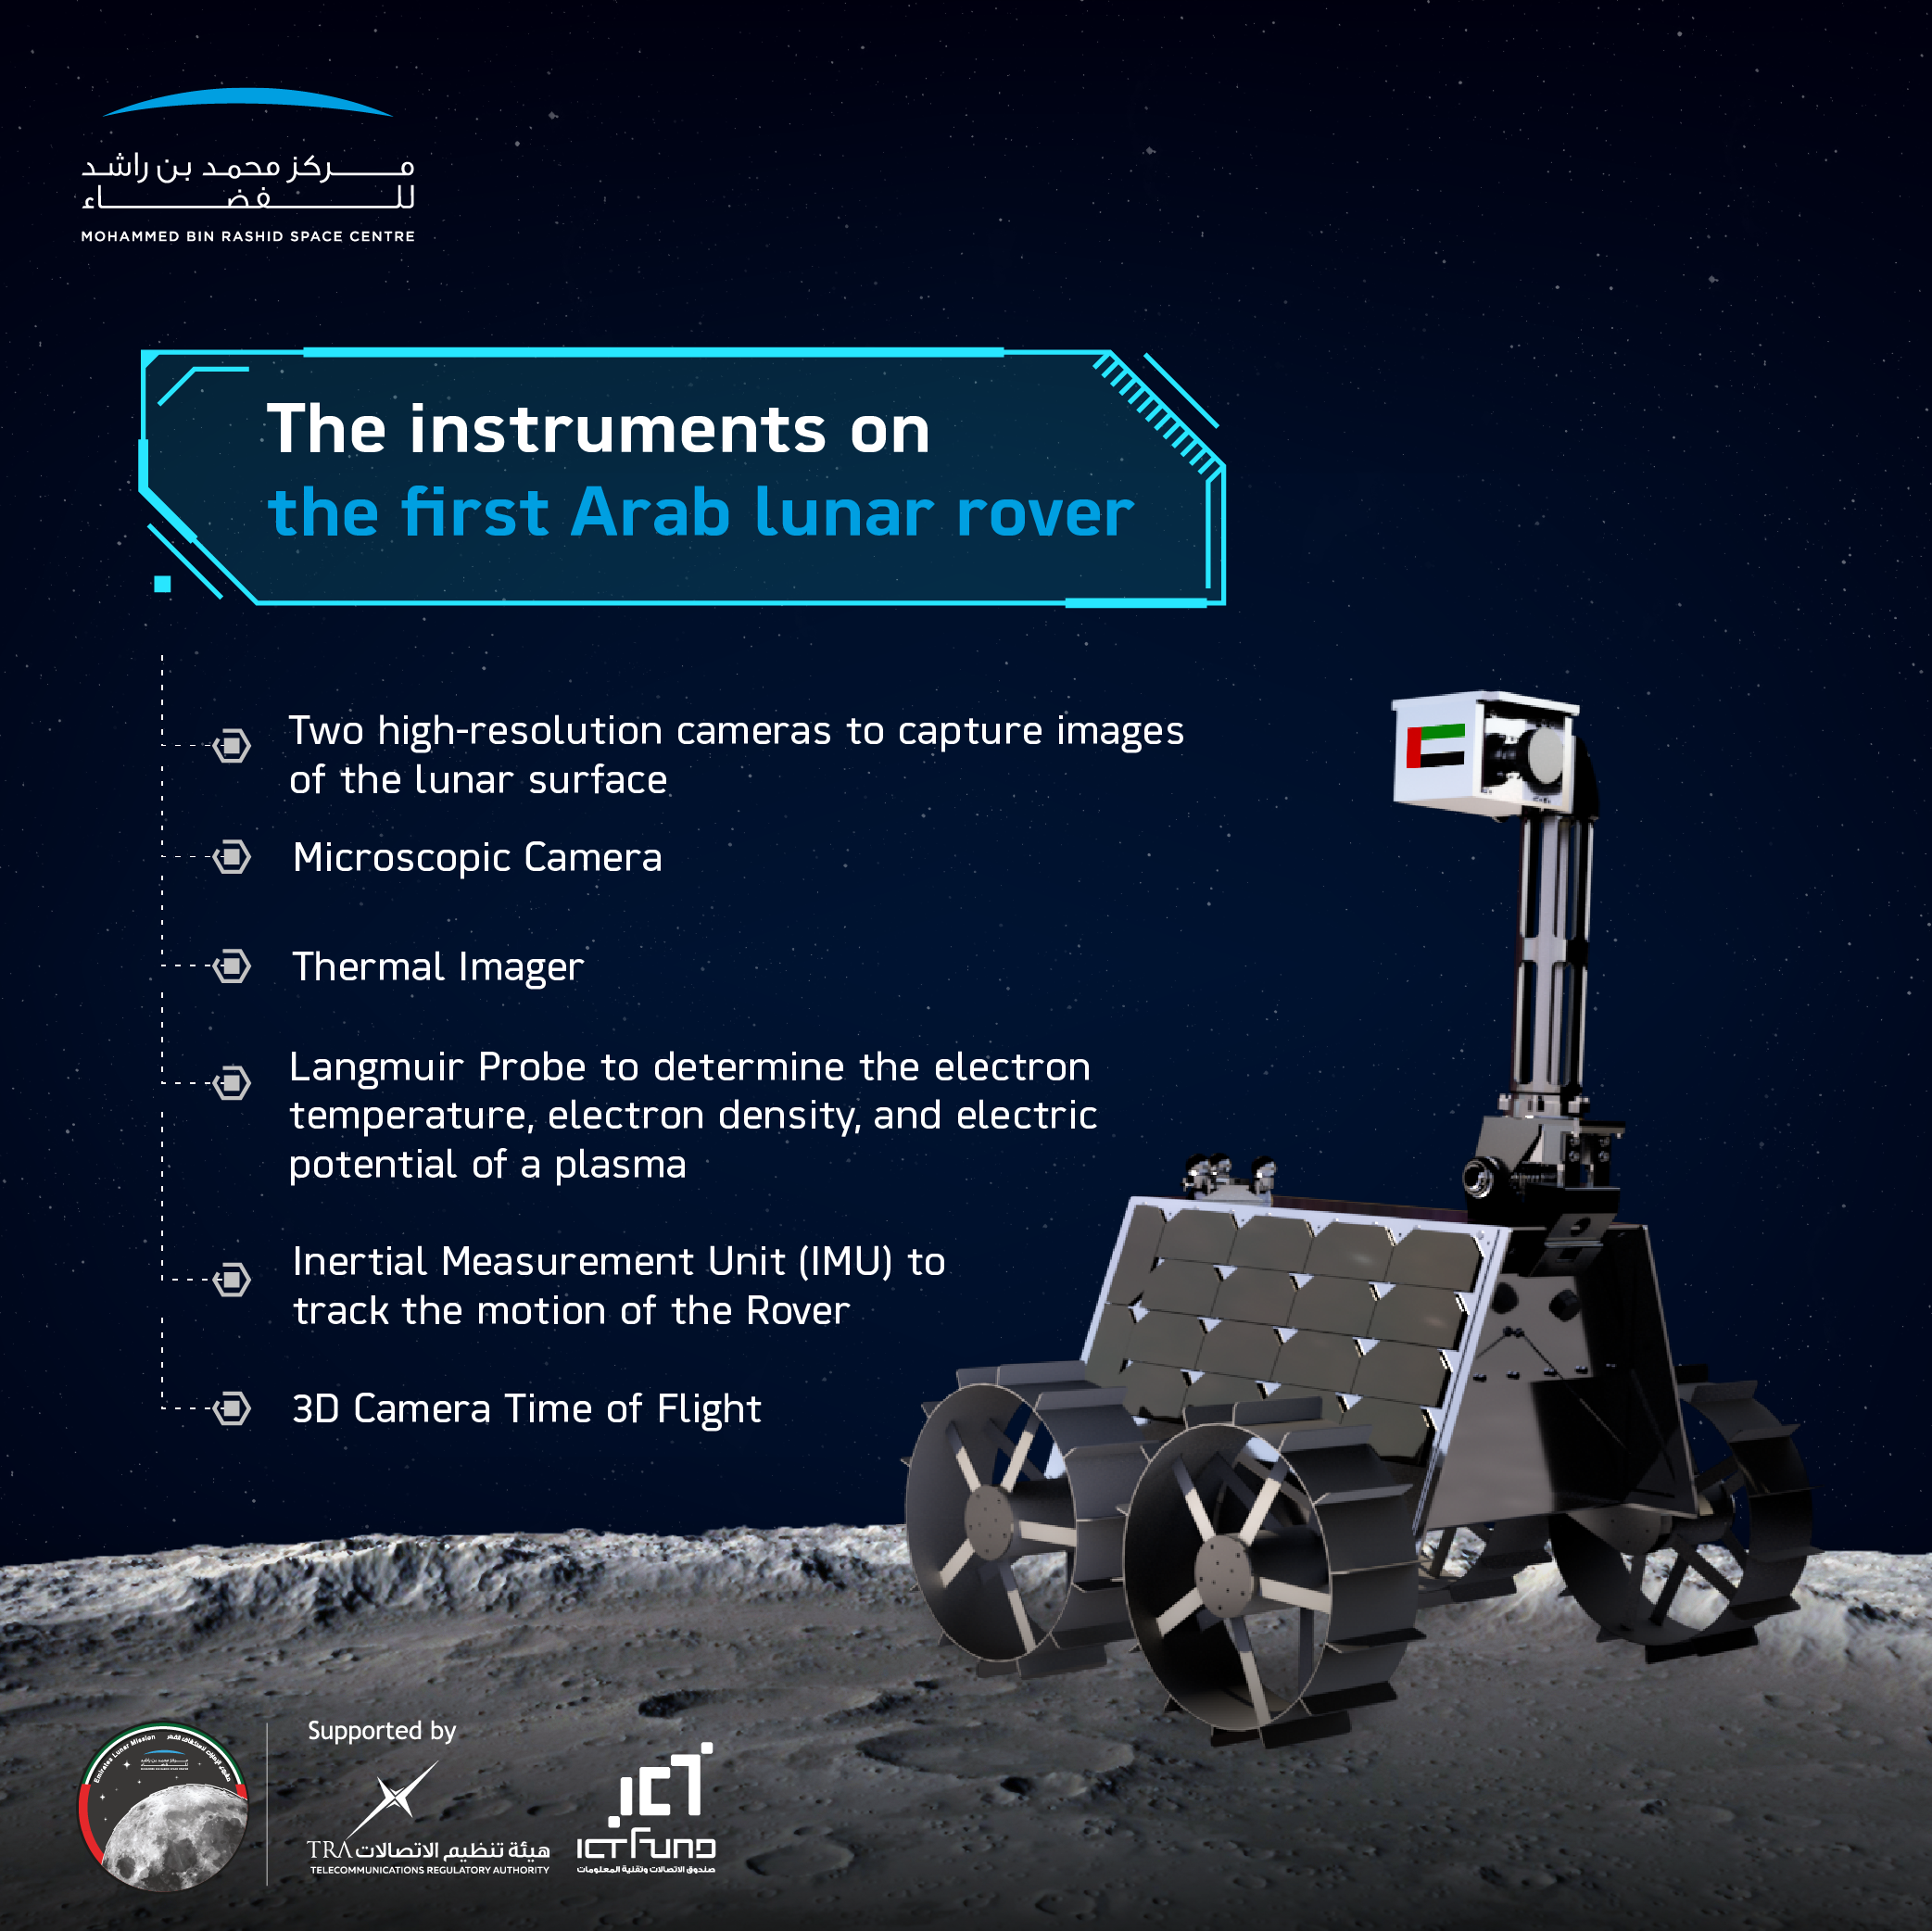 An artist's depiction of the UAE's planned moon rover seen on the lunar surface.